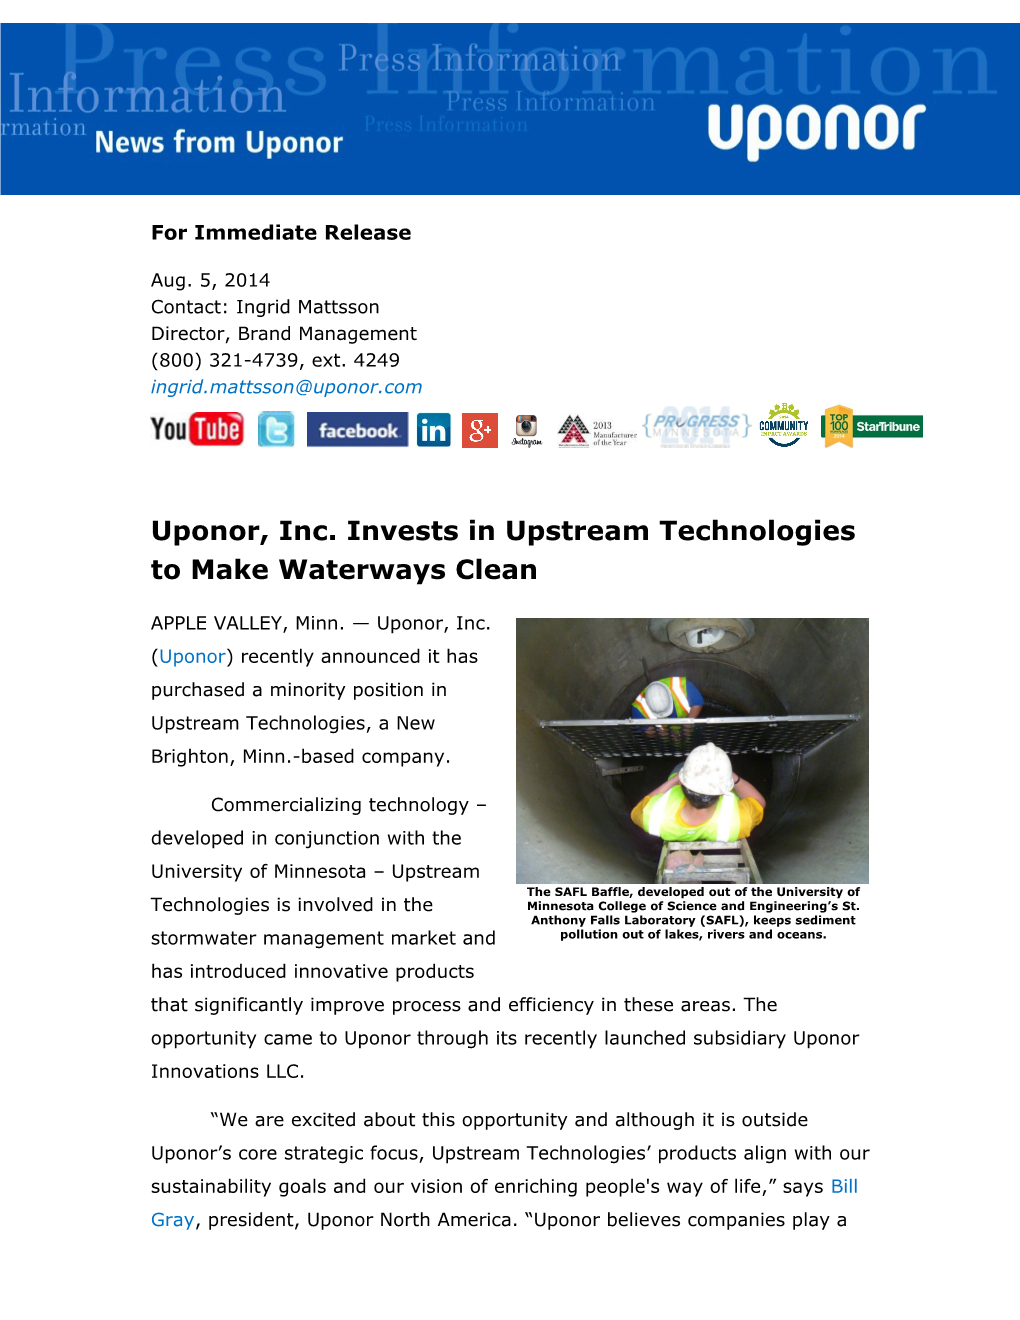 Uponor, Inc. Invests in Upstream Technologies to Make Waterways Clean